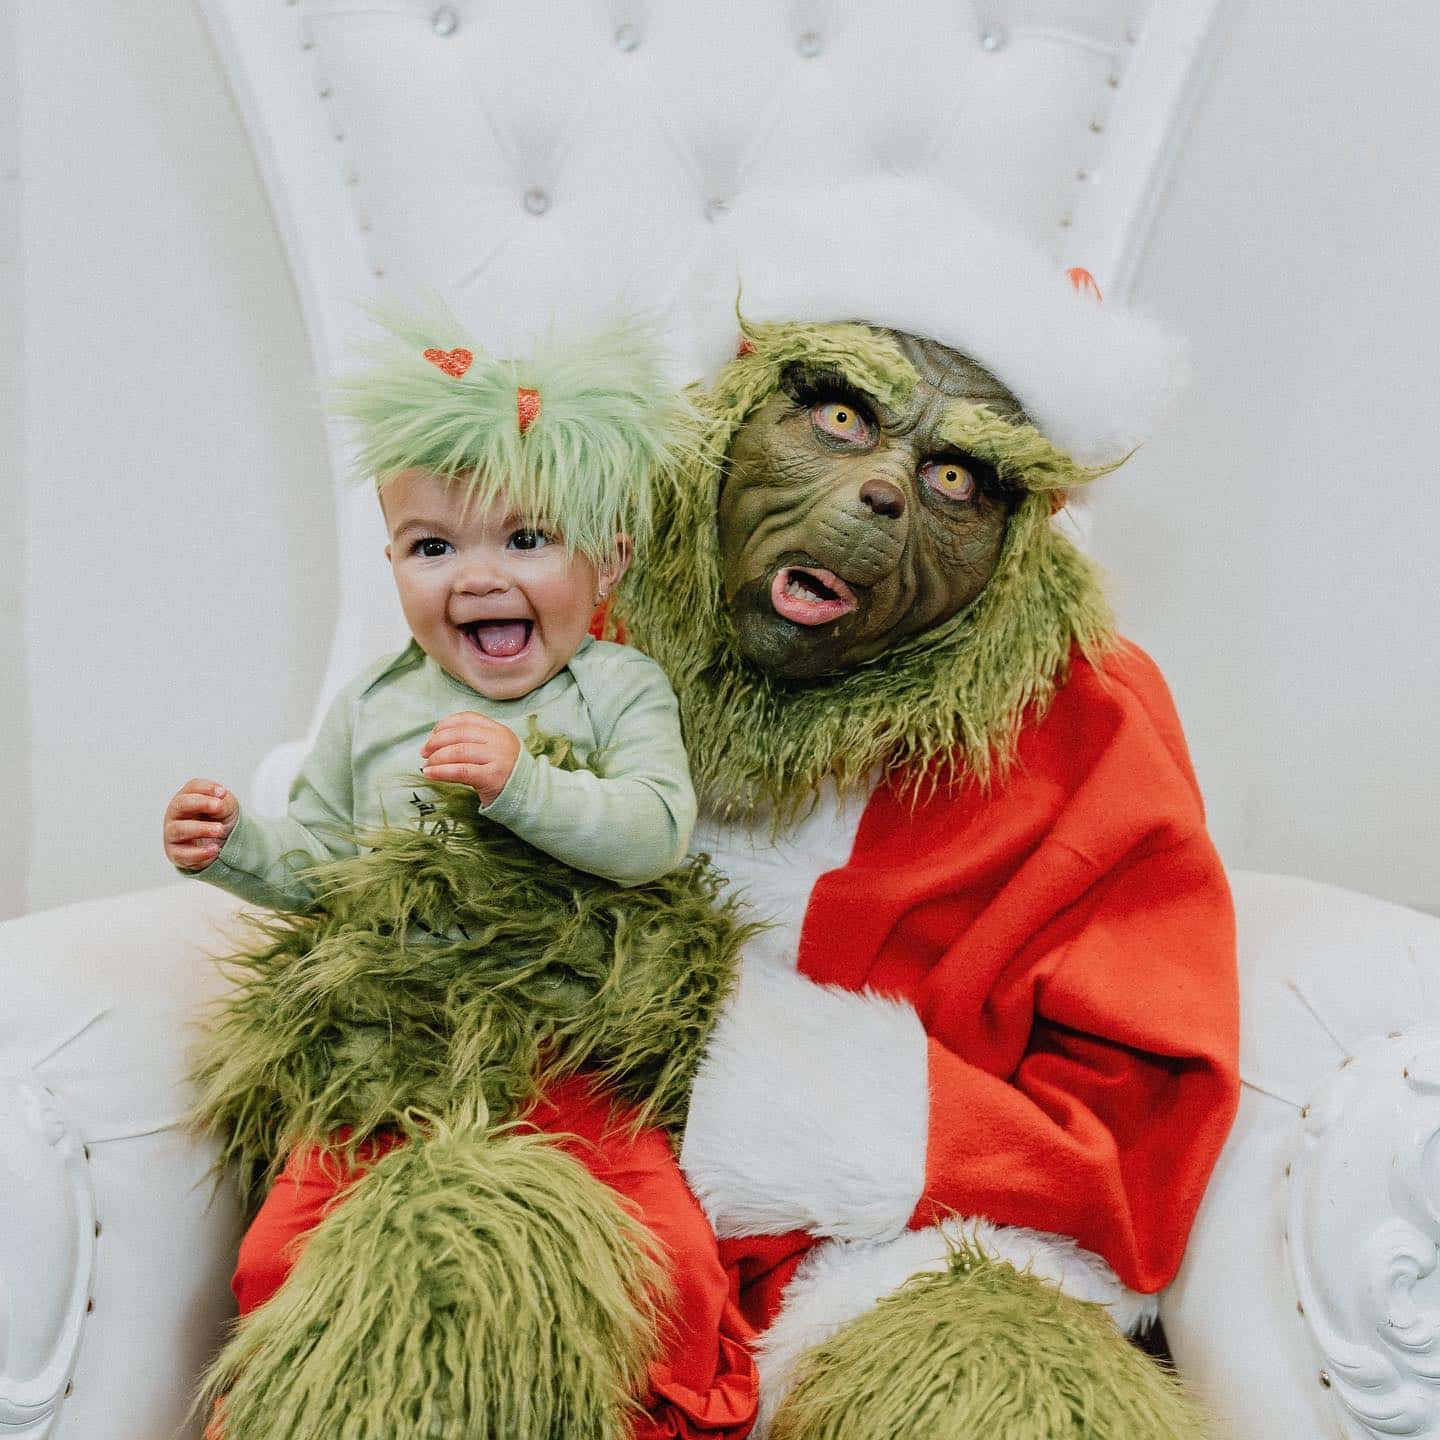 ONE MONTH UNTIL GRINCHMAS! Join us in Whoville on Saturday, December 3rd for holiday festivities starting at 3pm and movie beginning at sundown. 

EVENT DETAILS: 
🌲 Meet and greet with The Grinch
🌲 Hot cocoa bar, cookies, popcorn
🌲 Face painting, caricatures art, photo-ops
🌲 How The Grinch Stole Christmas (2000. PG)
🌲 Tickets on sale now with limited availability ($5)
🌲 Proceeds directly benefit @levinechildrens 

Visit the link in our bio for more information!